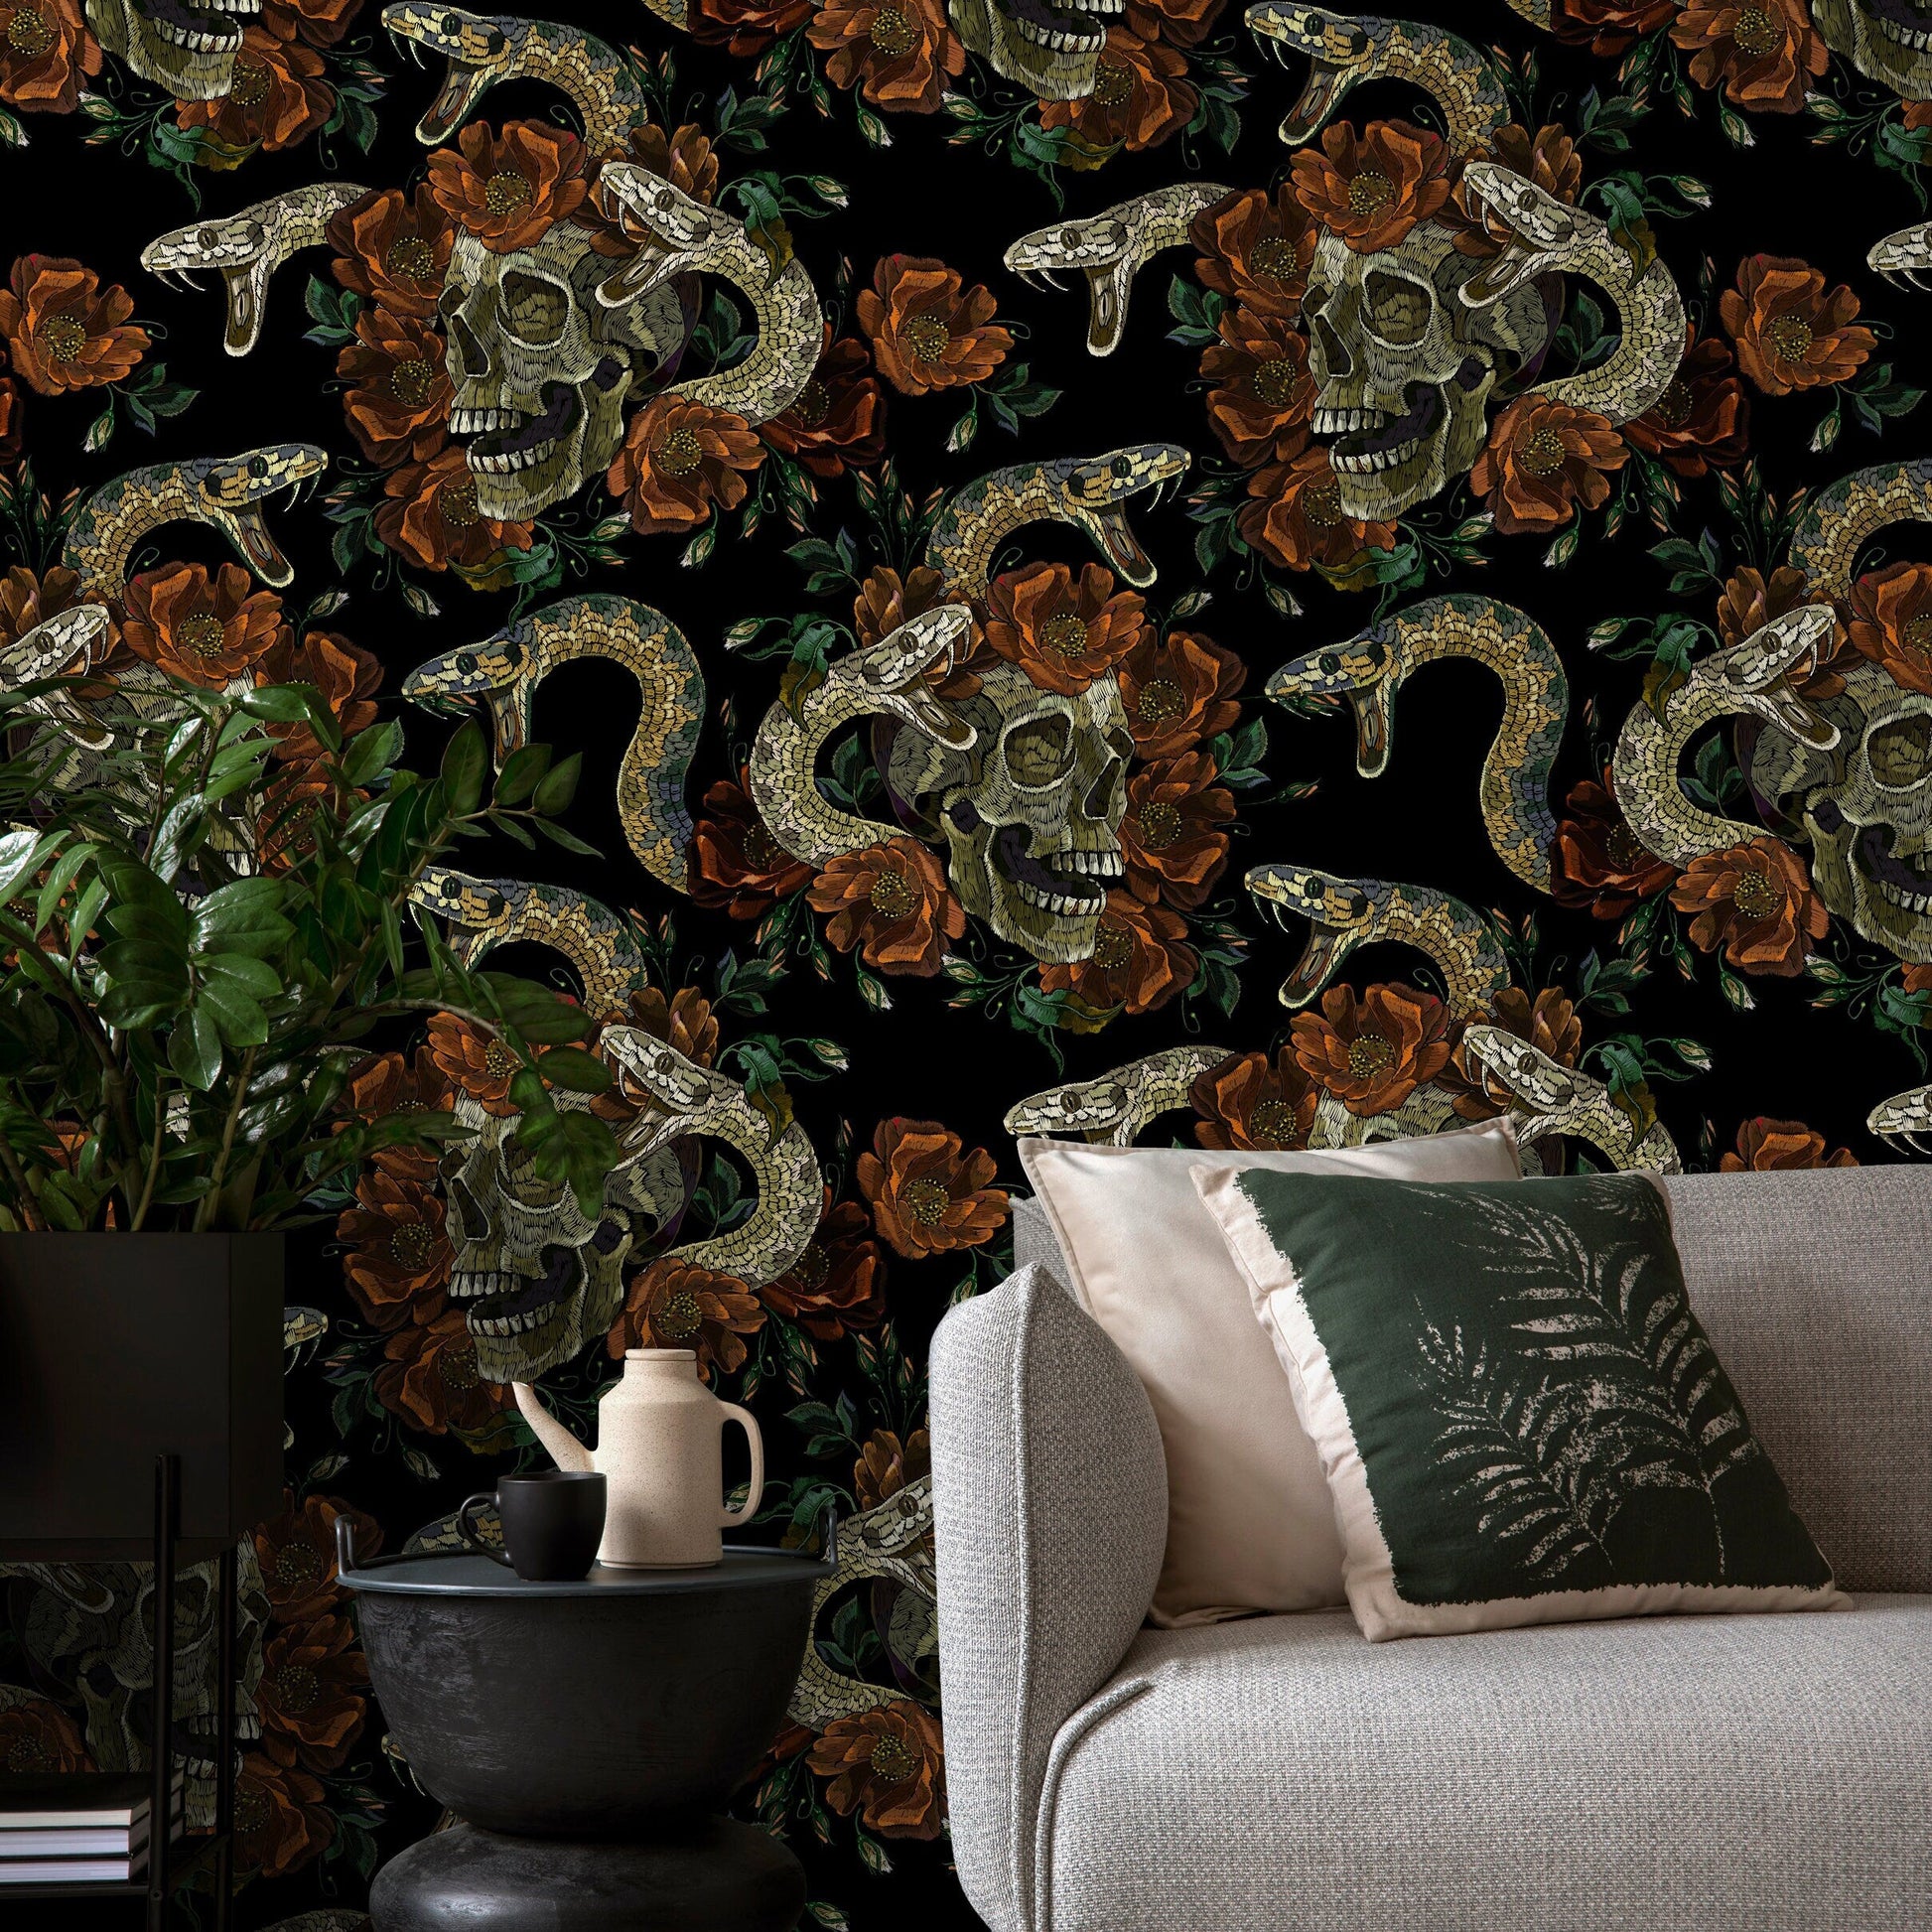 Dark Floral Wallpaper Snake and Skulls Wallpaper Peel and Stick and Traditional Wallpaper - D901